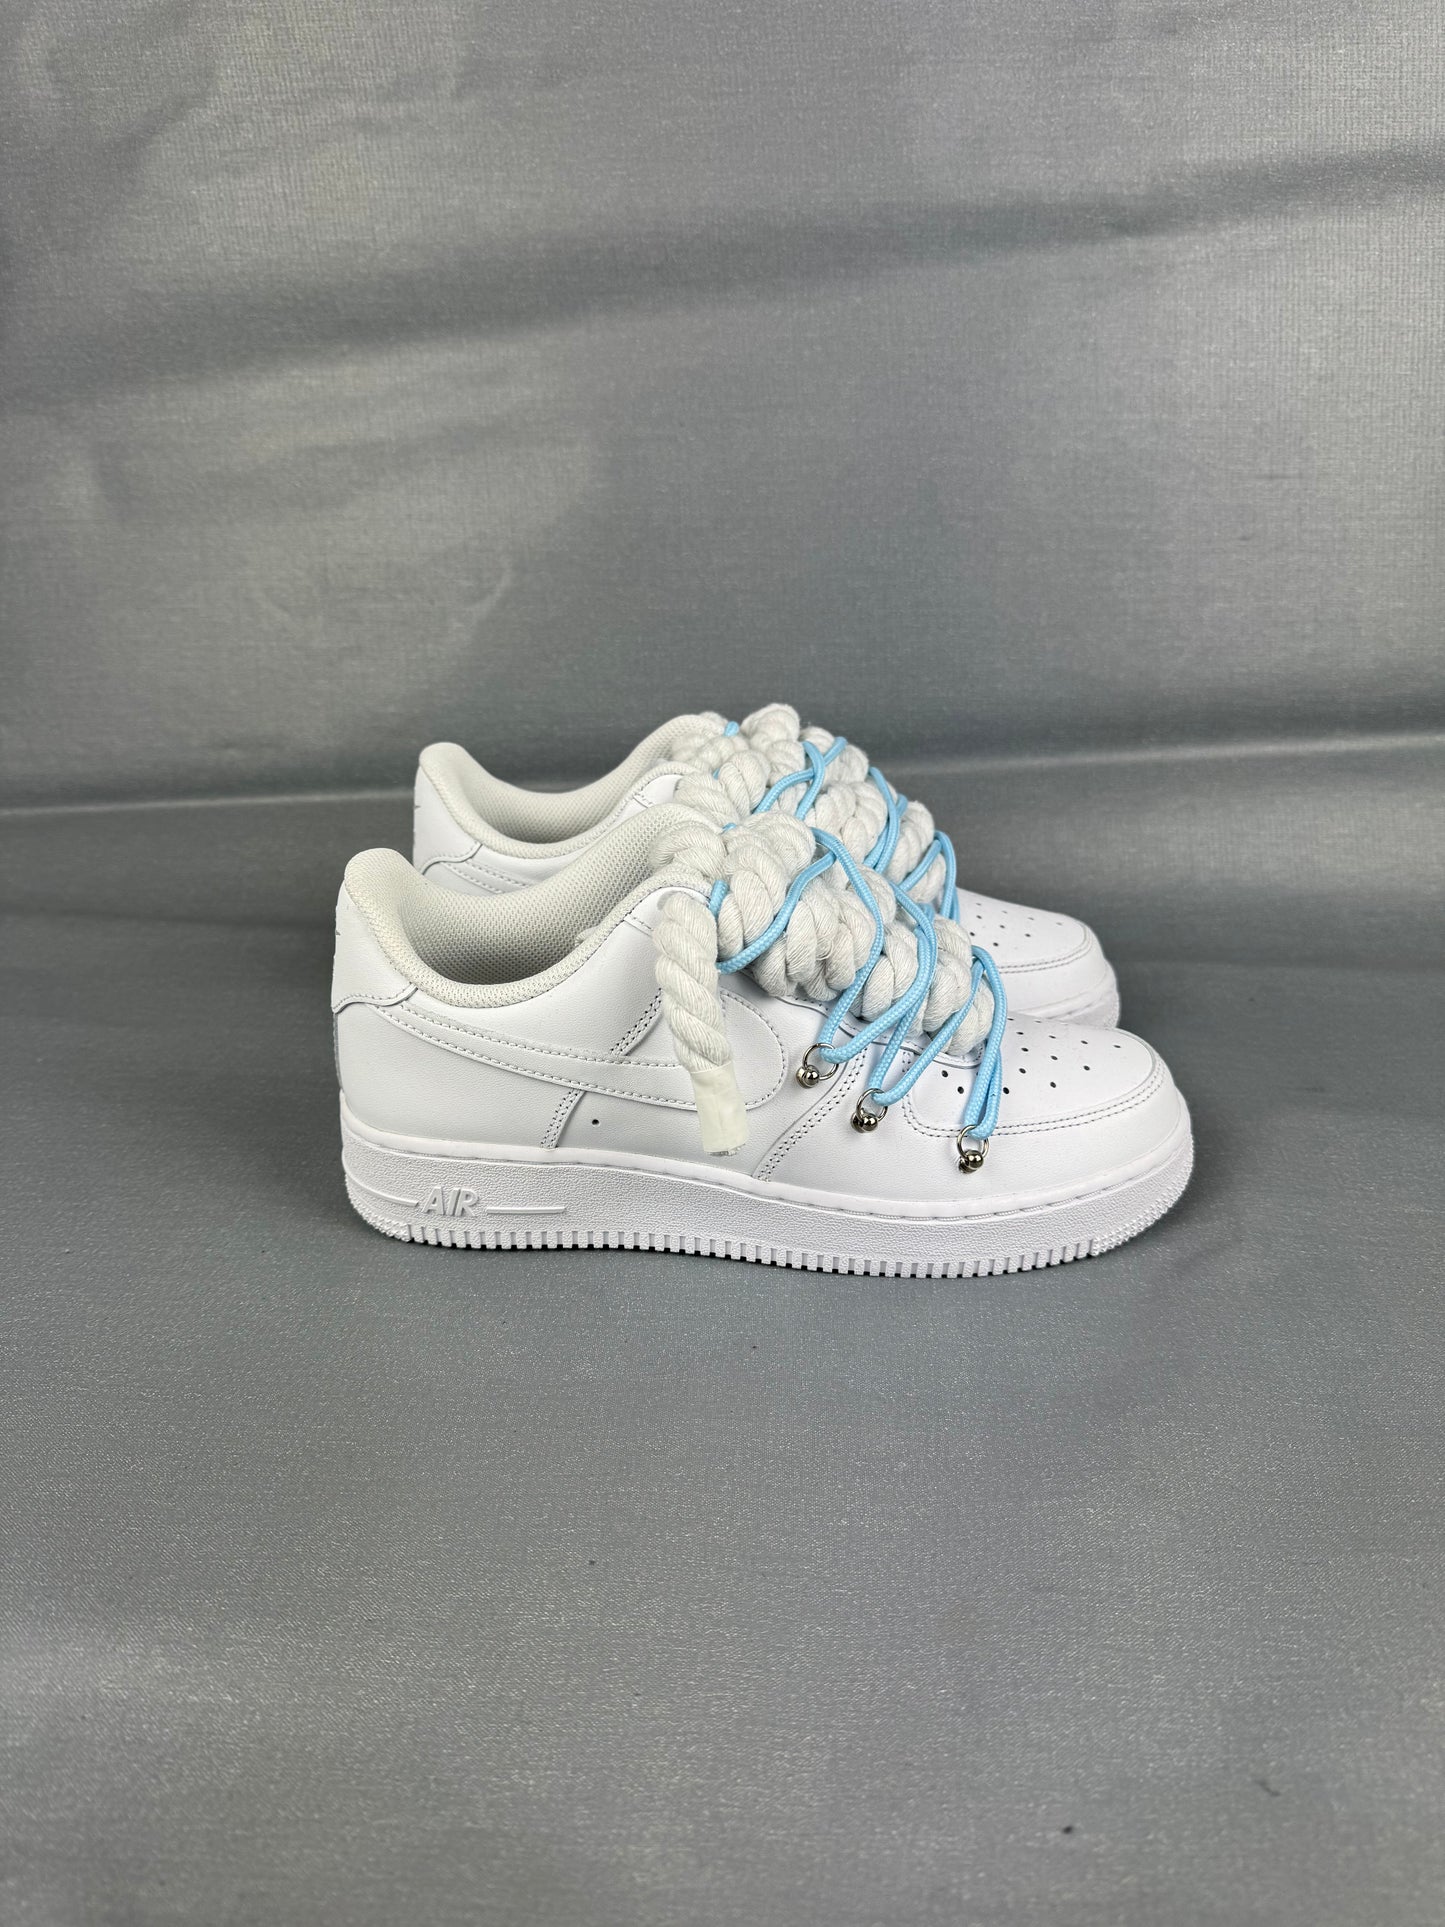 AF1 White | Spesh Laces baby Blue